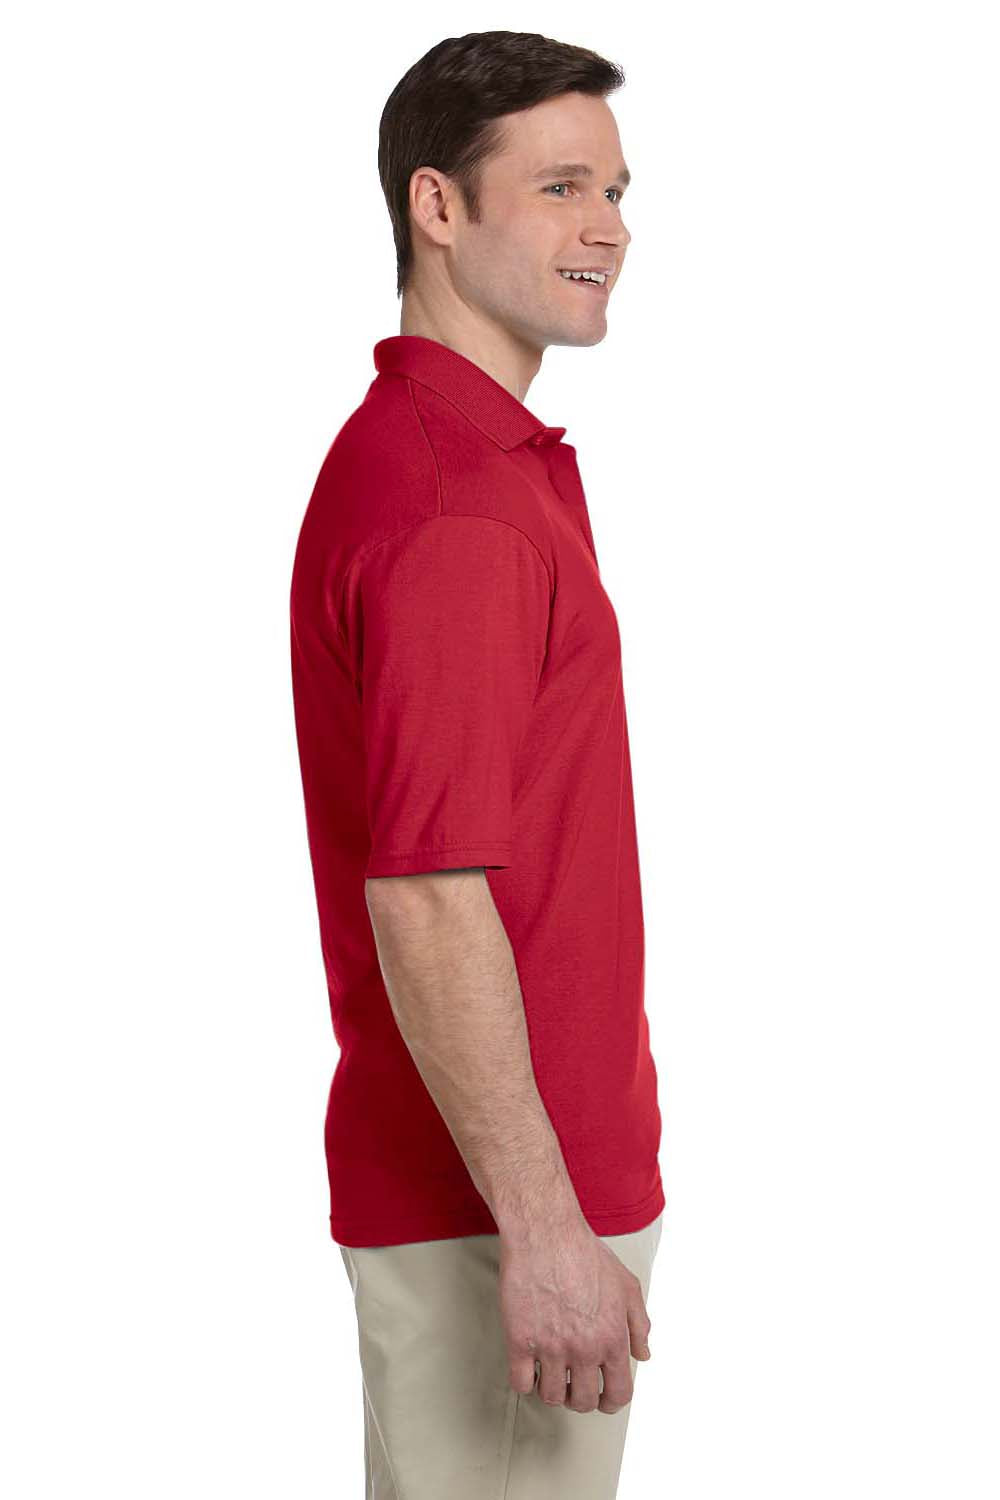 Jerzees 436P Mens SpotShield Stain Resistant Short Sleeve Polo Shirt w/ Pocket Red Side